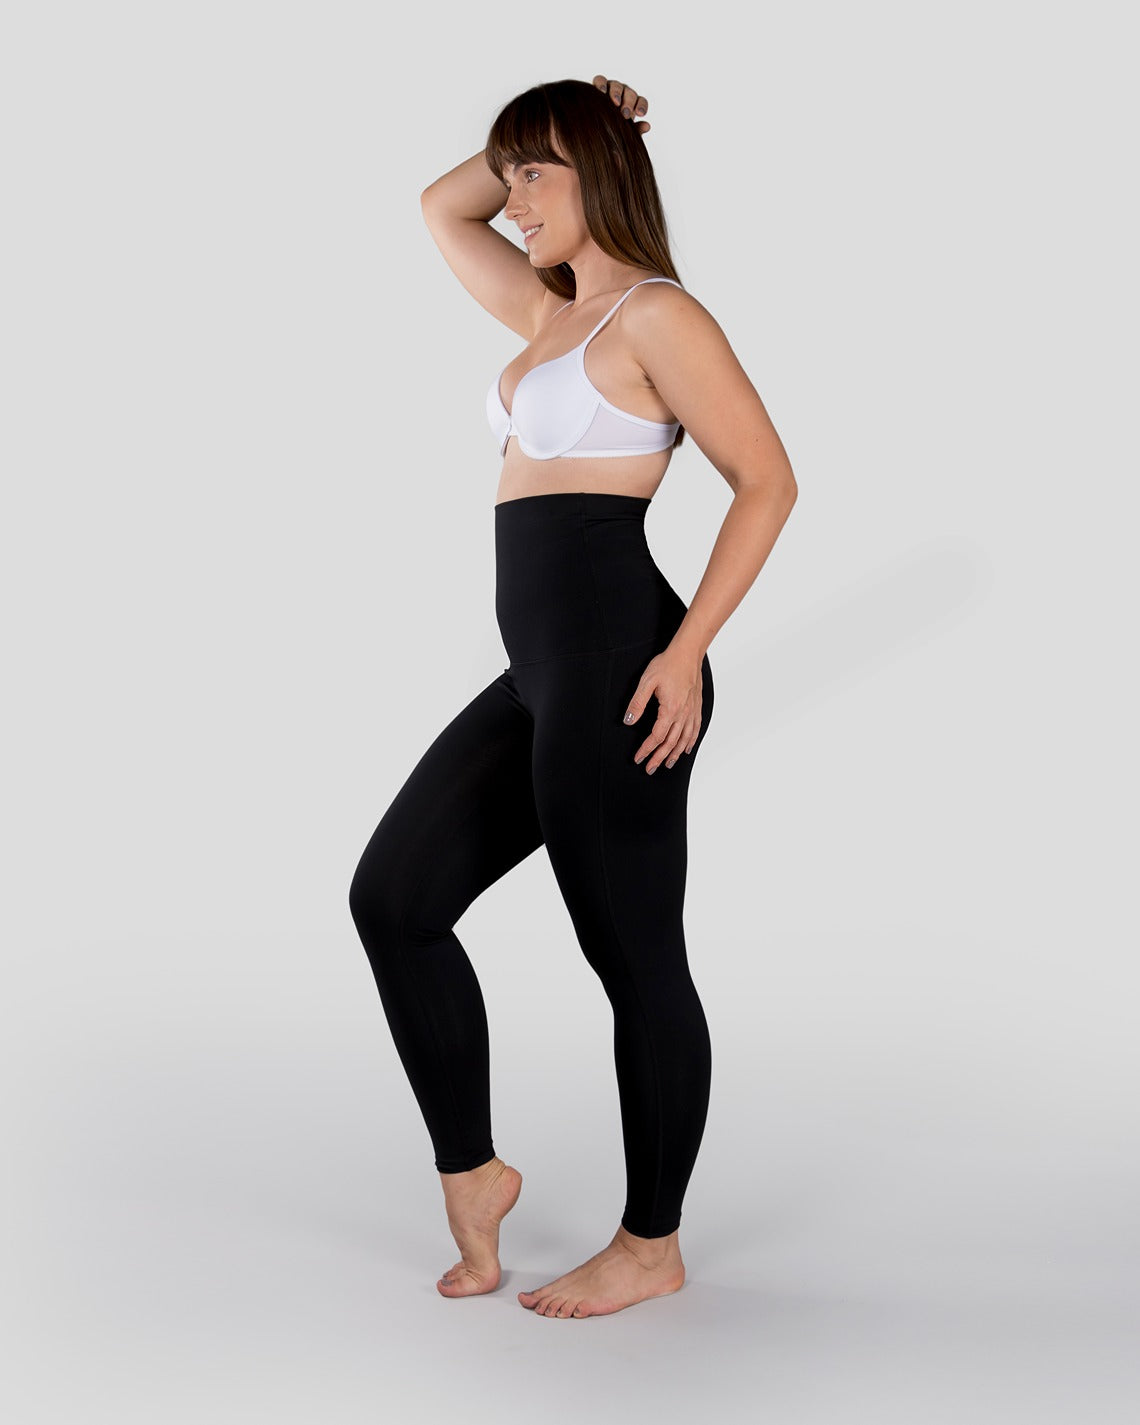 Postpartum Belly Shaperwomen's High Waist Yoga Pants - Seamless Compression  Leggings For Postpartum Recovery